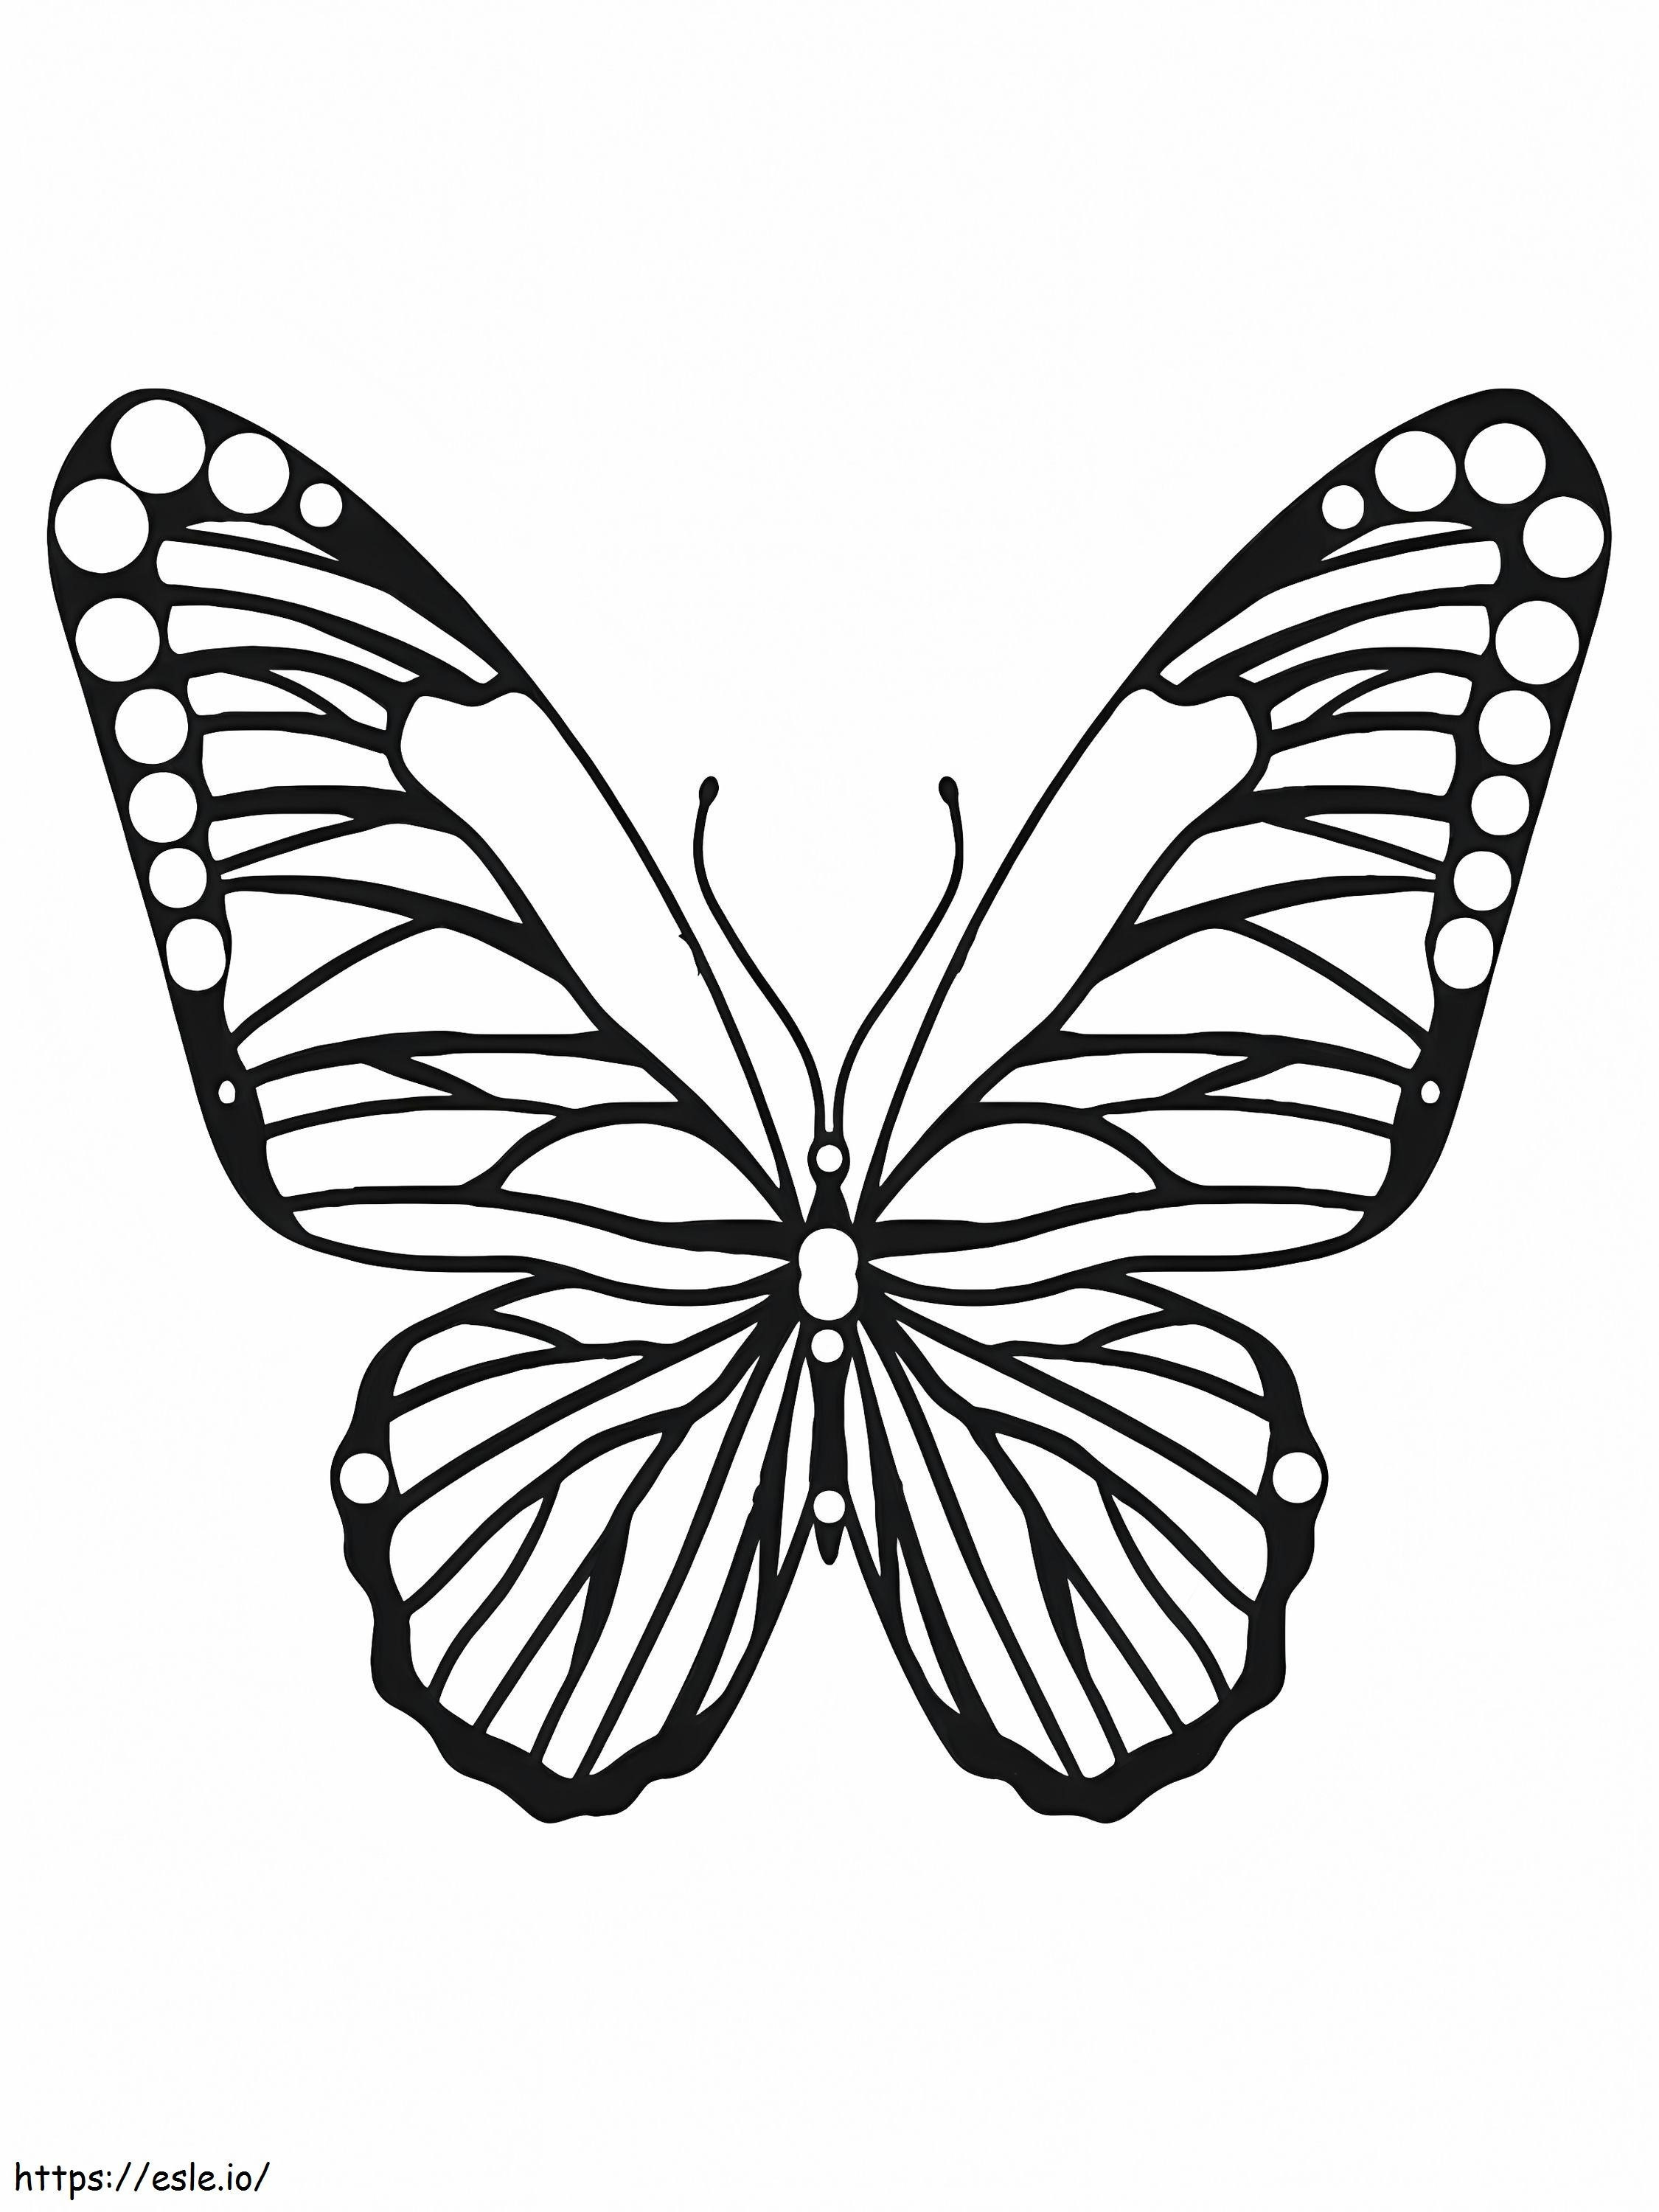 Attractive Butterfly coloring page